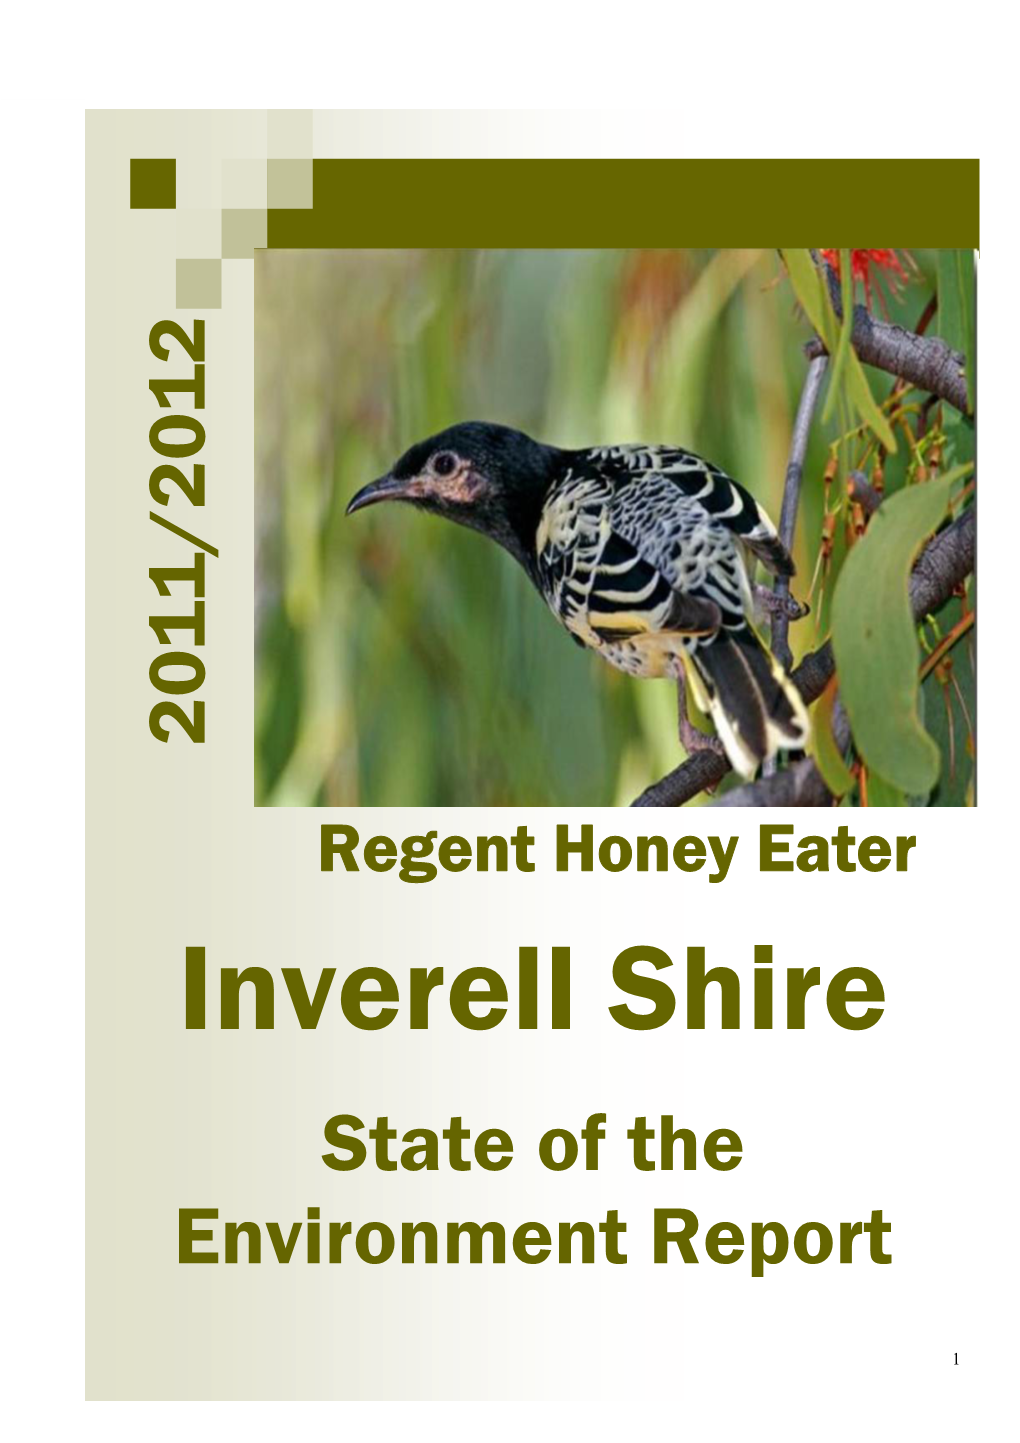 2011/2012 State of the Environment Report